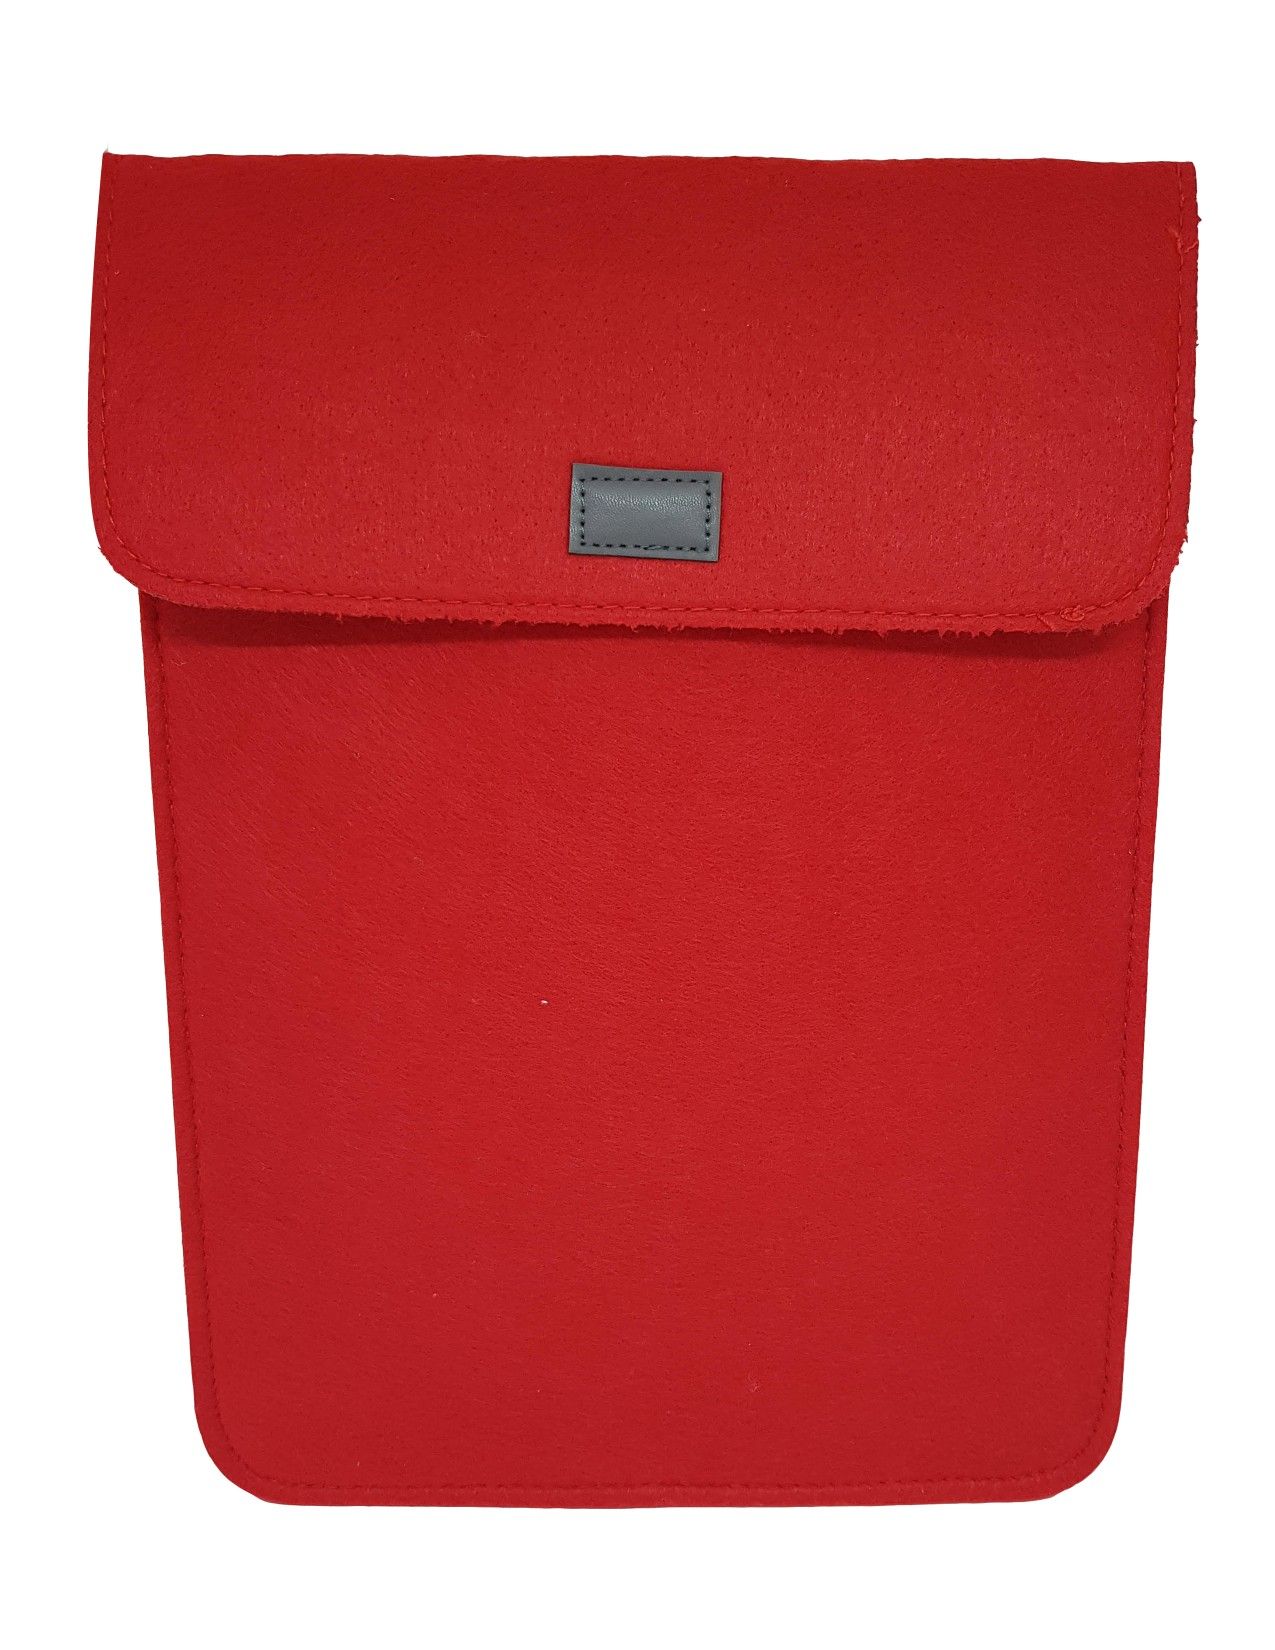 Visual Echoes Premium Ipad & Tablets Sleeve - Red (9.7 Inch)